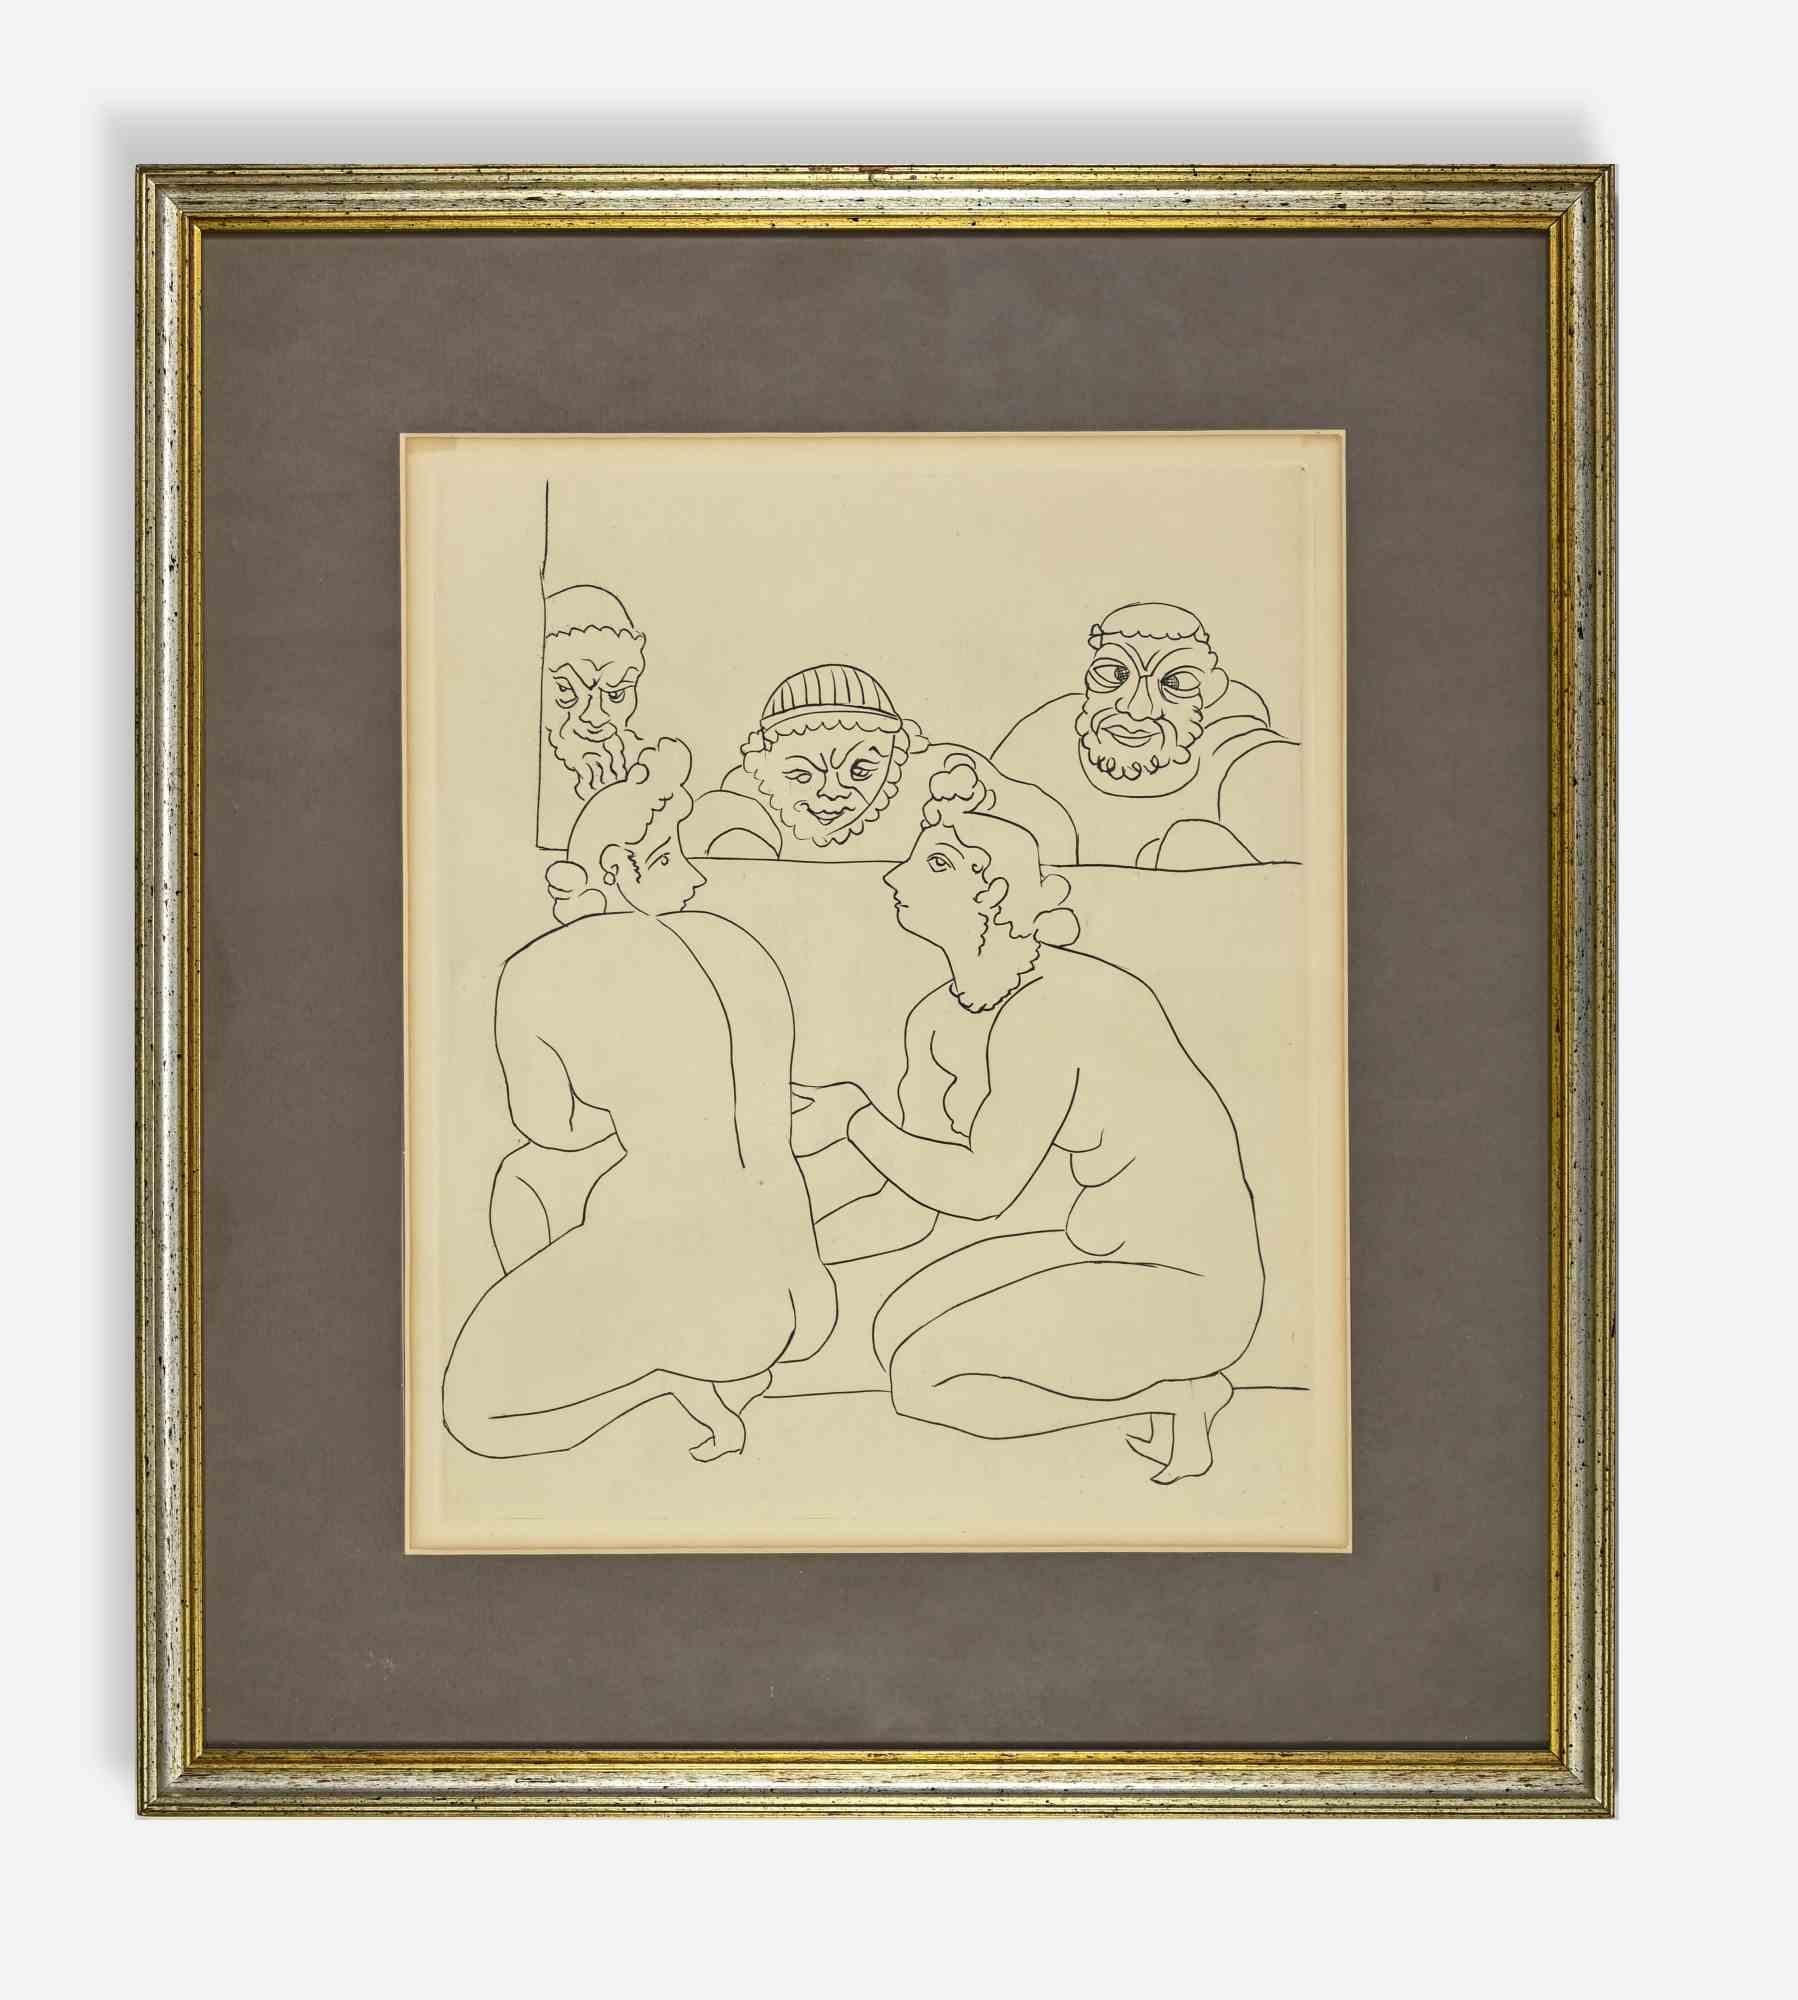 Le Satyricon is a modern artwork realized by Andrè Derain in 1951

Black and white etching.

Includes frame.

Fair conditions.

The artwork is the plate 4 published by Aux Depens d'un Amateur, Paris 1951.

Reference: Cat. Ambroise Vollard Editeur -